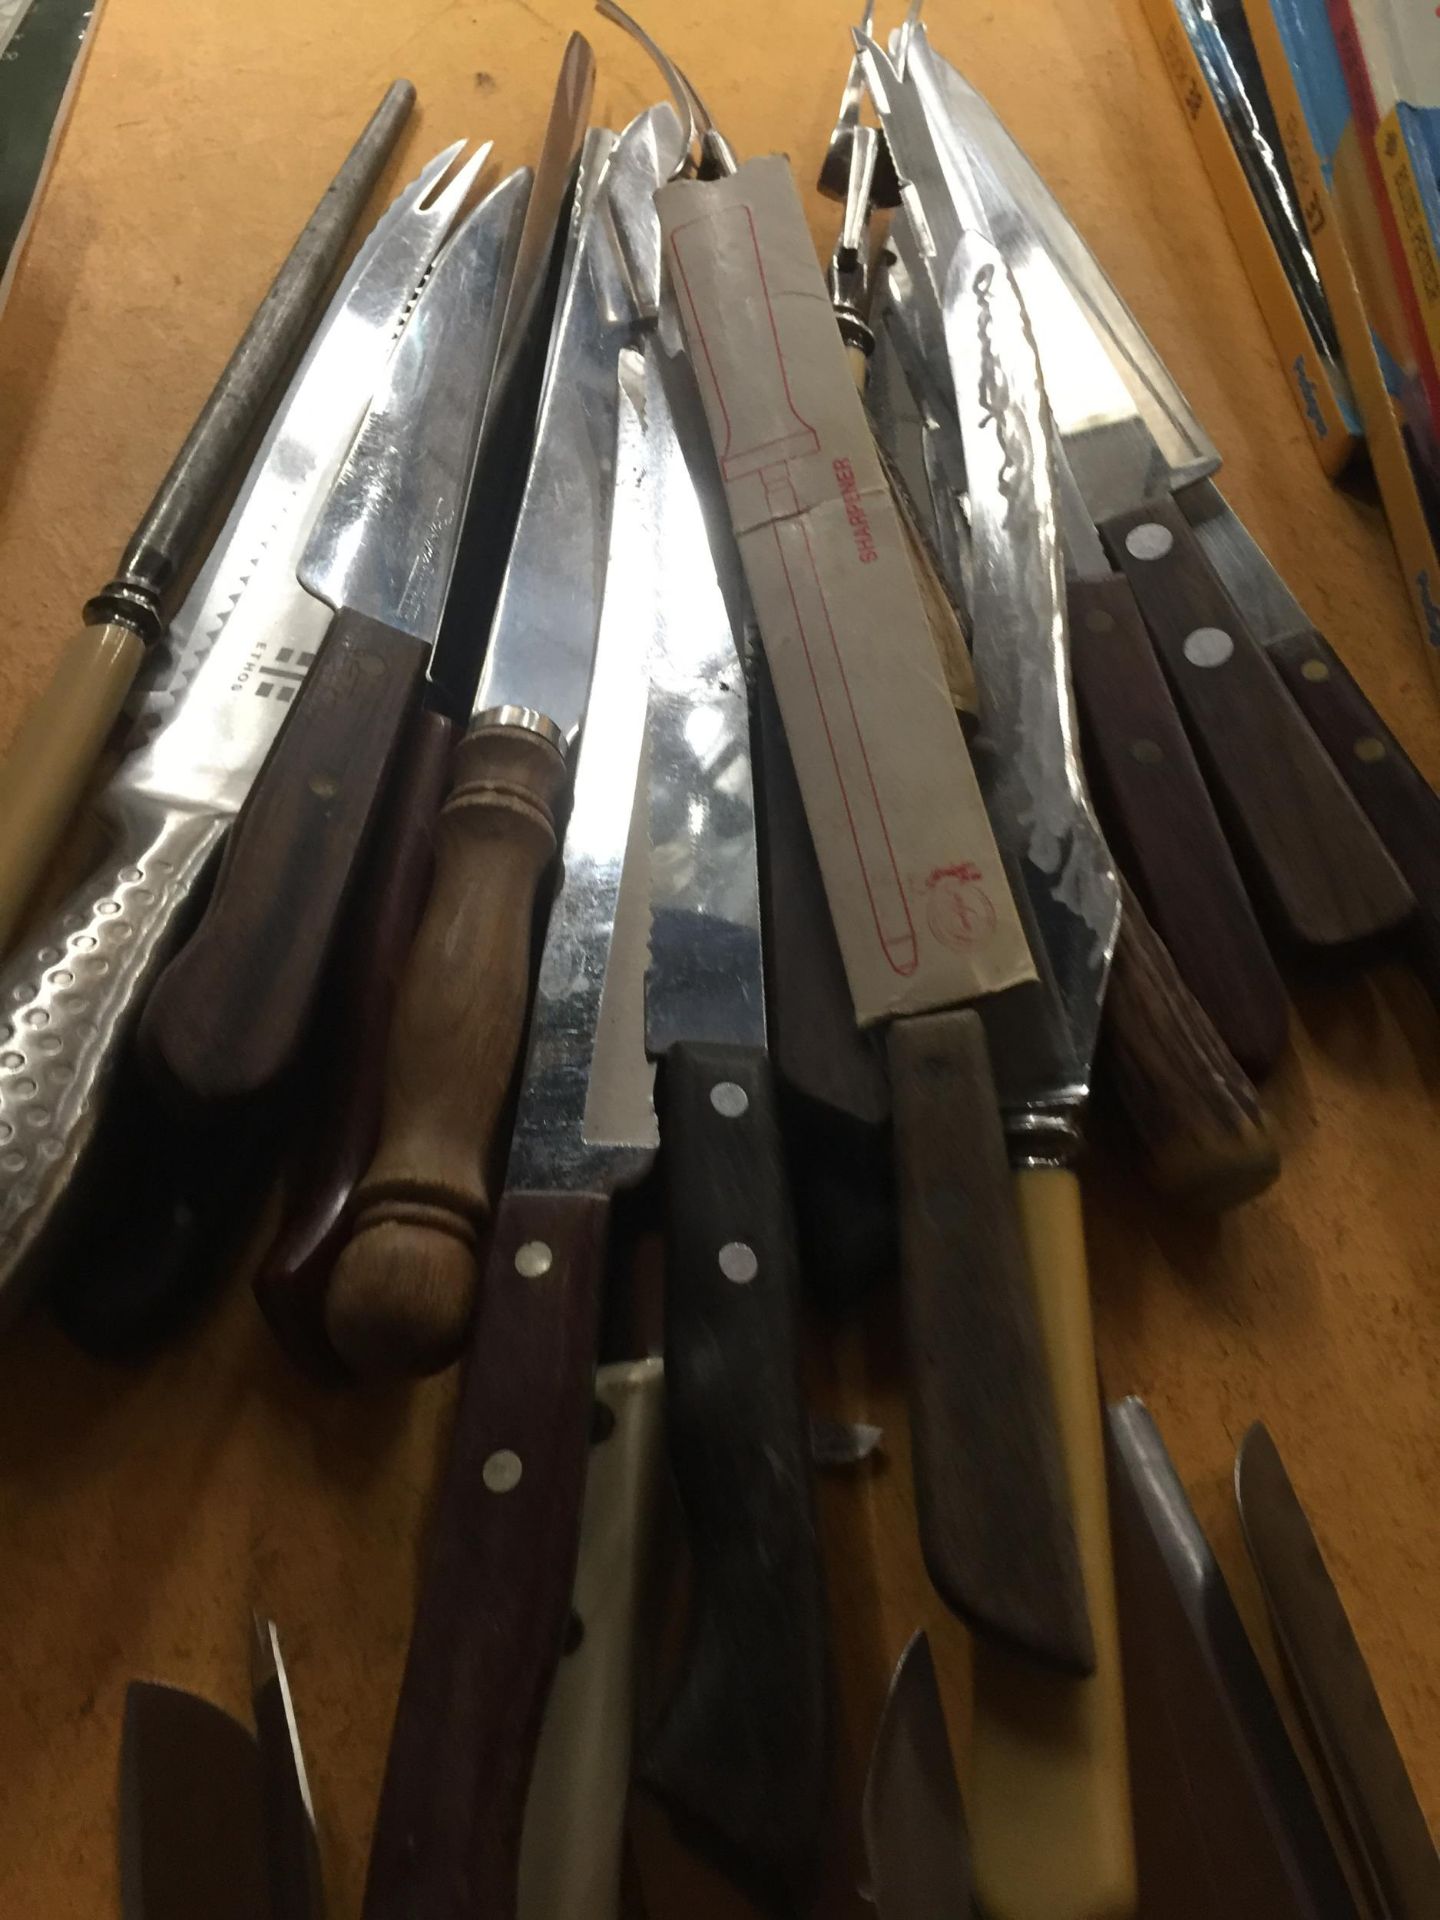 A MIXED LOT OF VINTAGE CARVING KNIVES ETC - Image 2 of 3